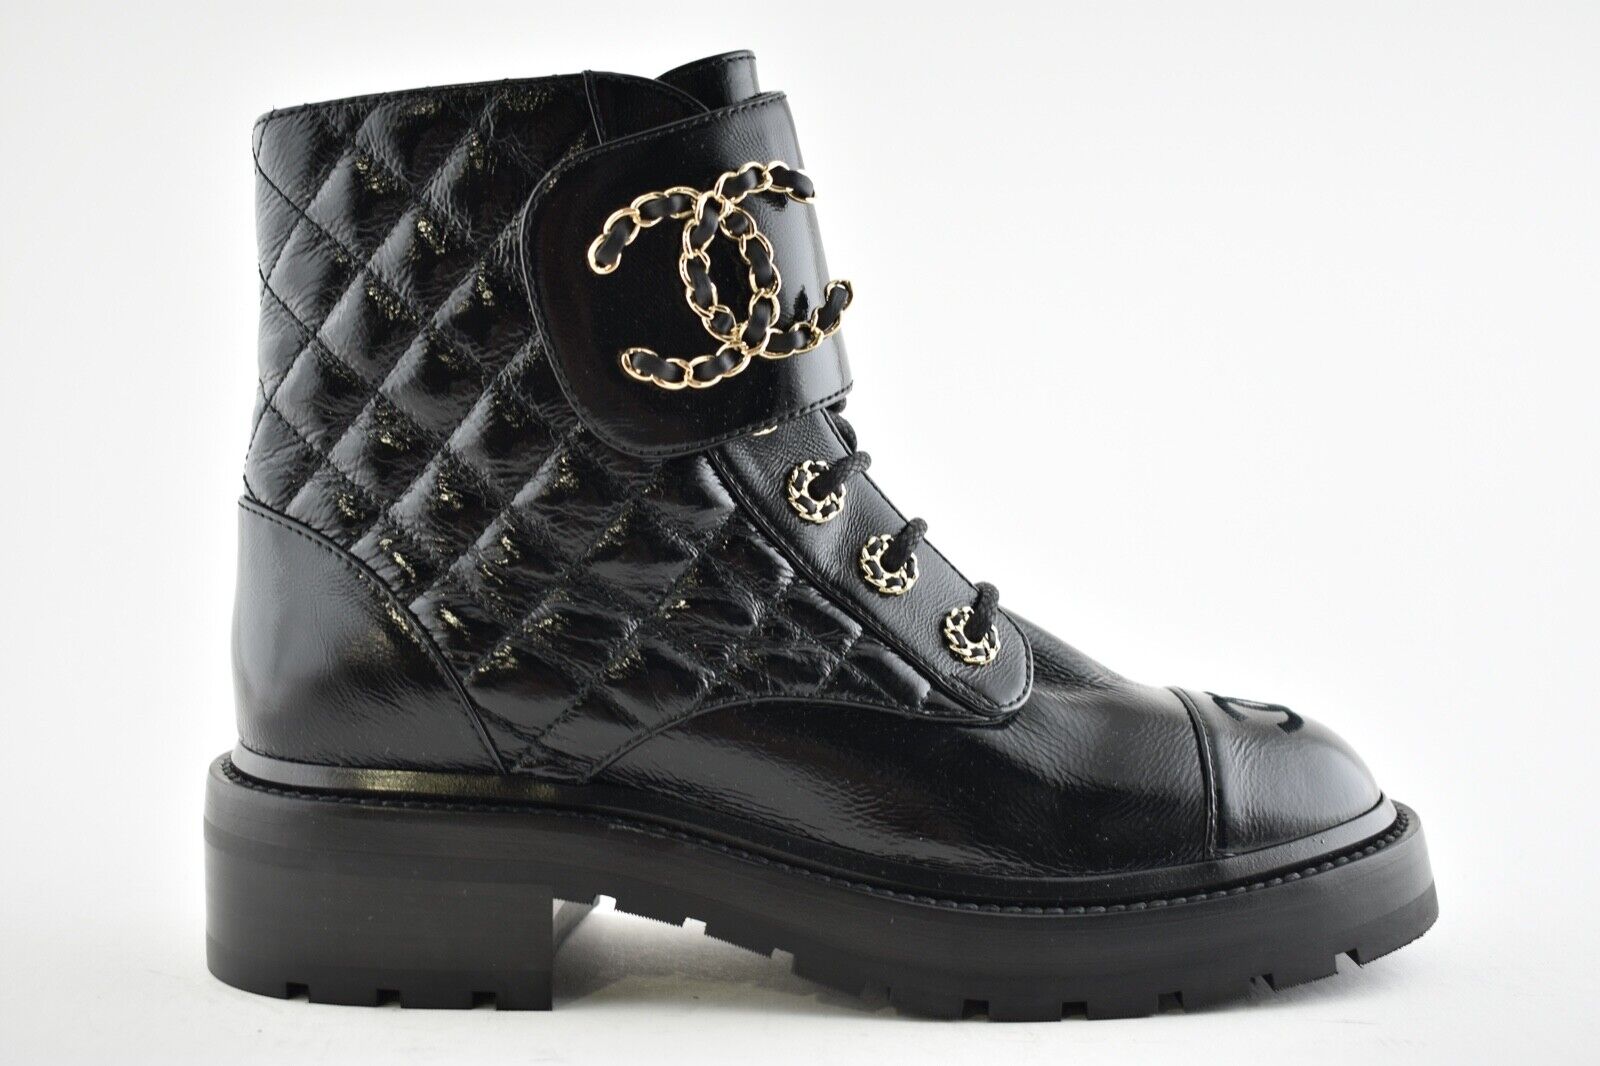 Valeska Combat Ankle Boots in Bone/Black Contrast | Size 10 | American Threads